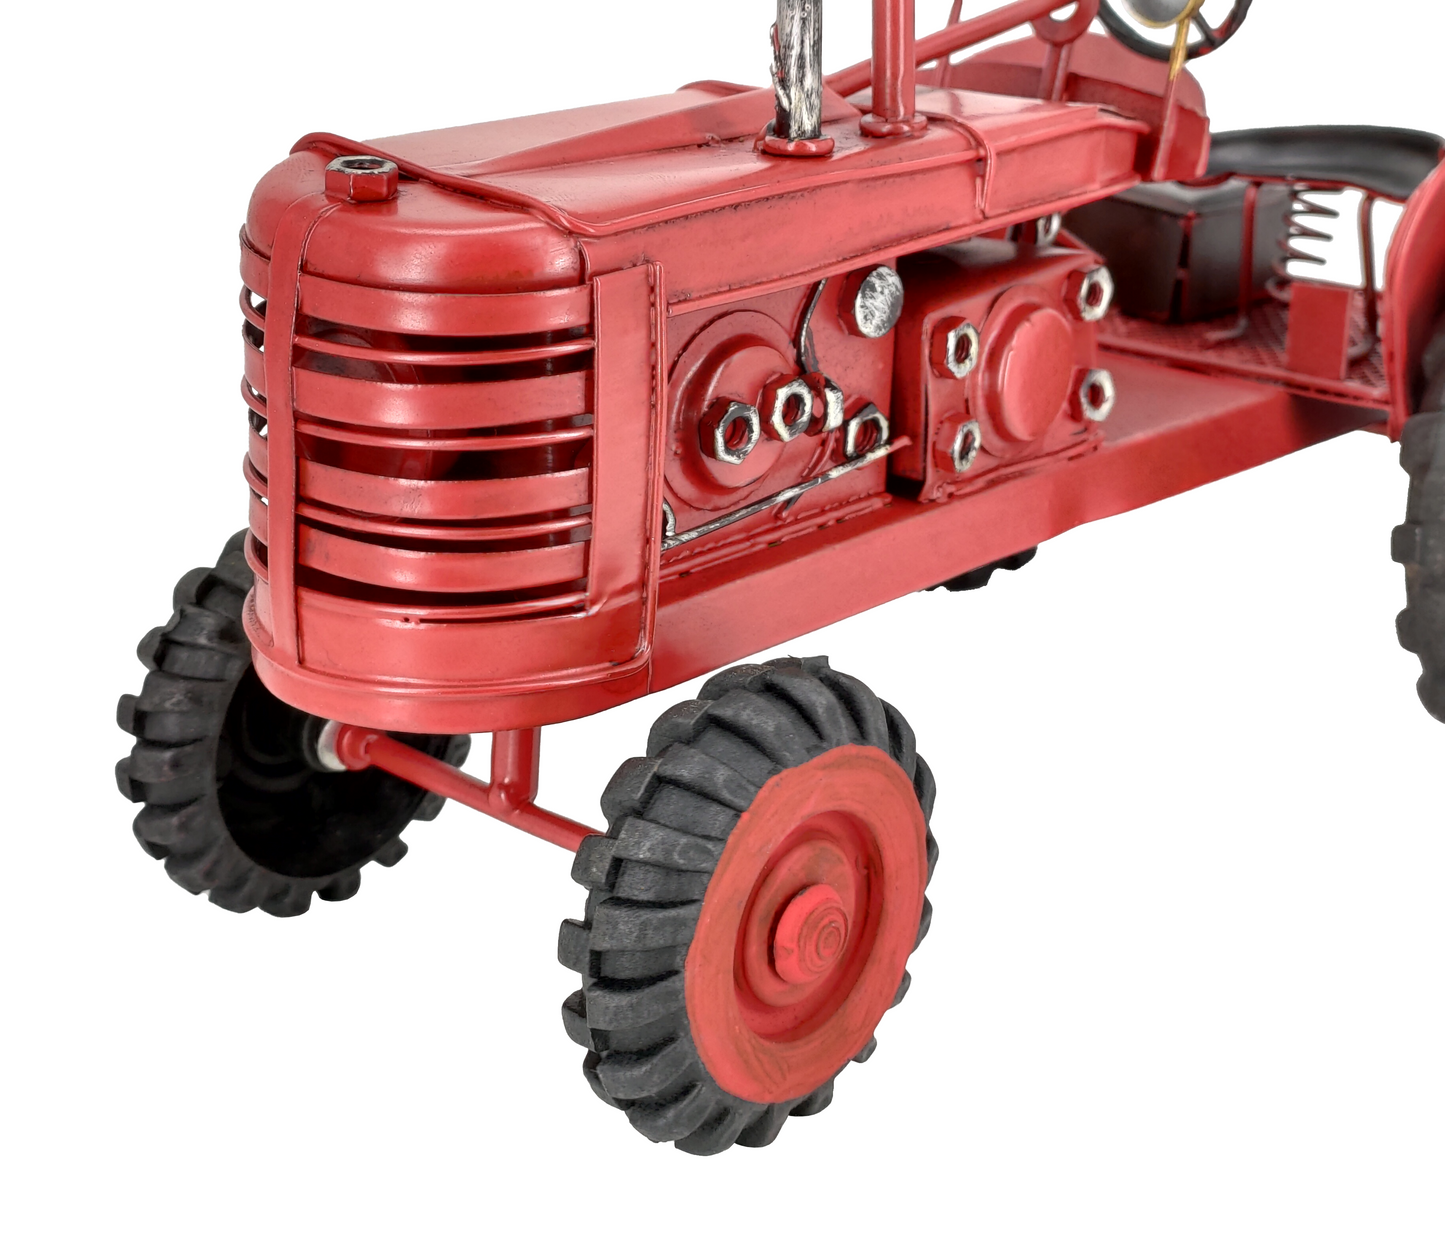 VINTAGE RED TRACTOR DIECAST MODEL